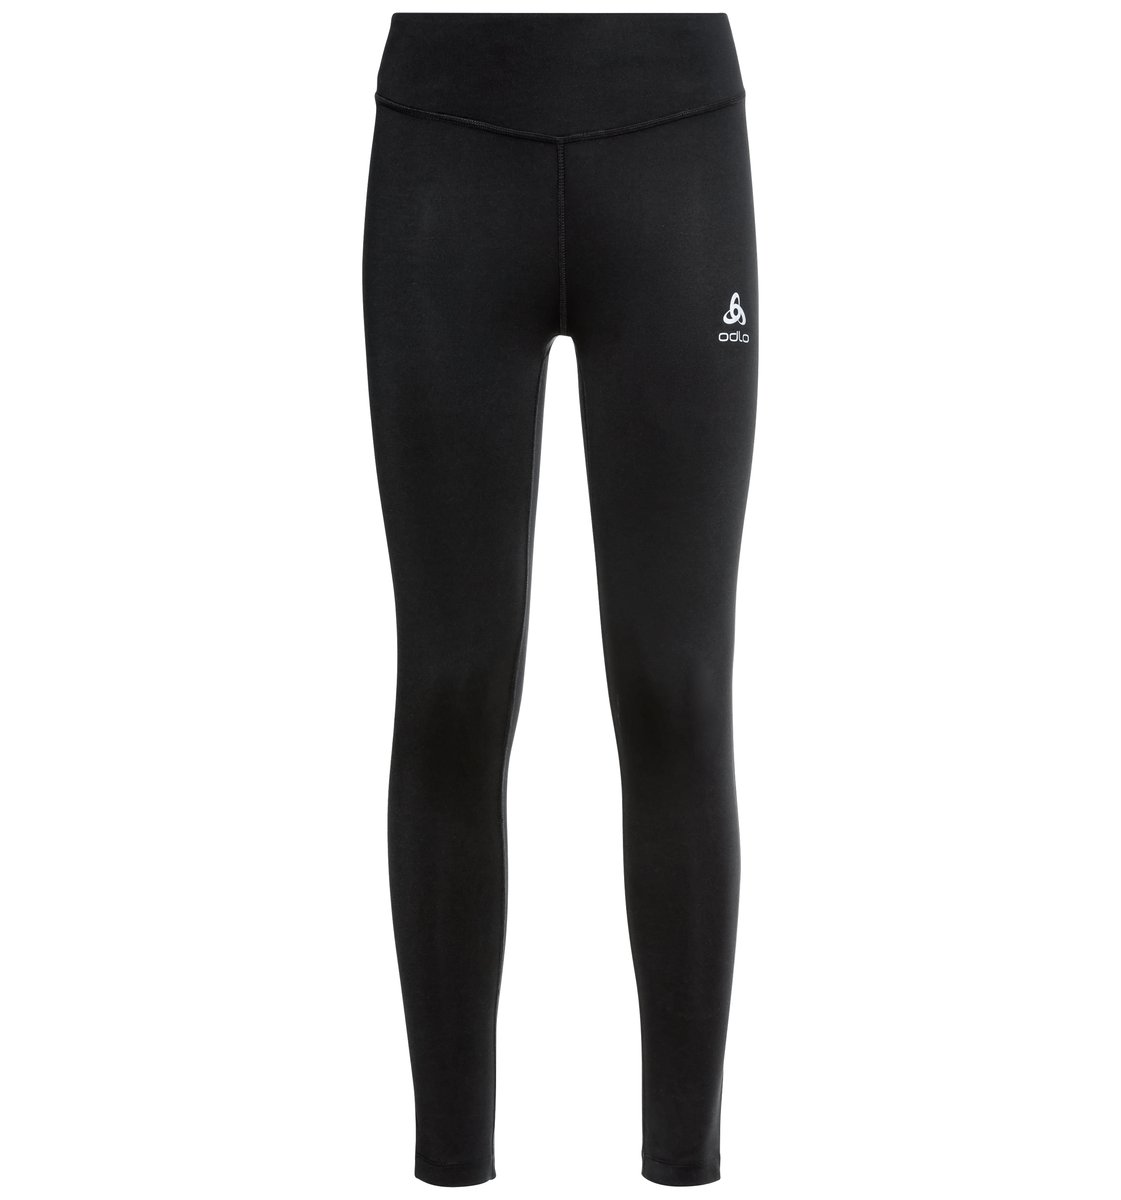 Women's The Essential Running Tights Black